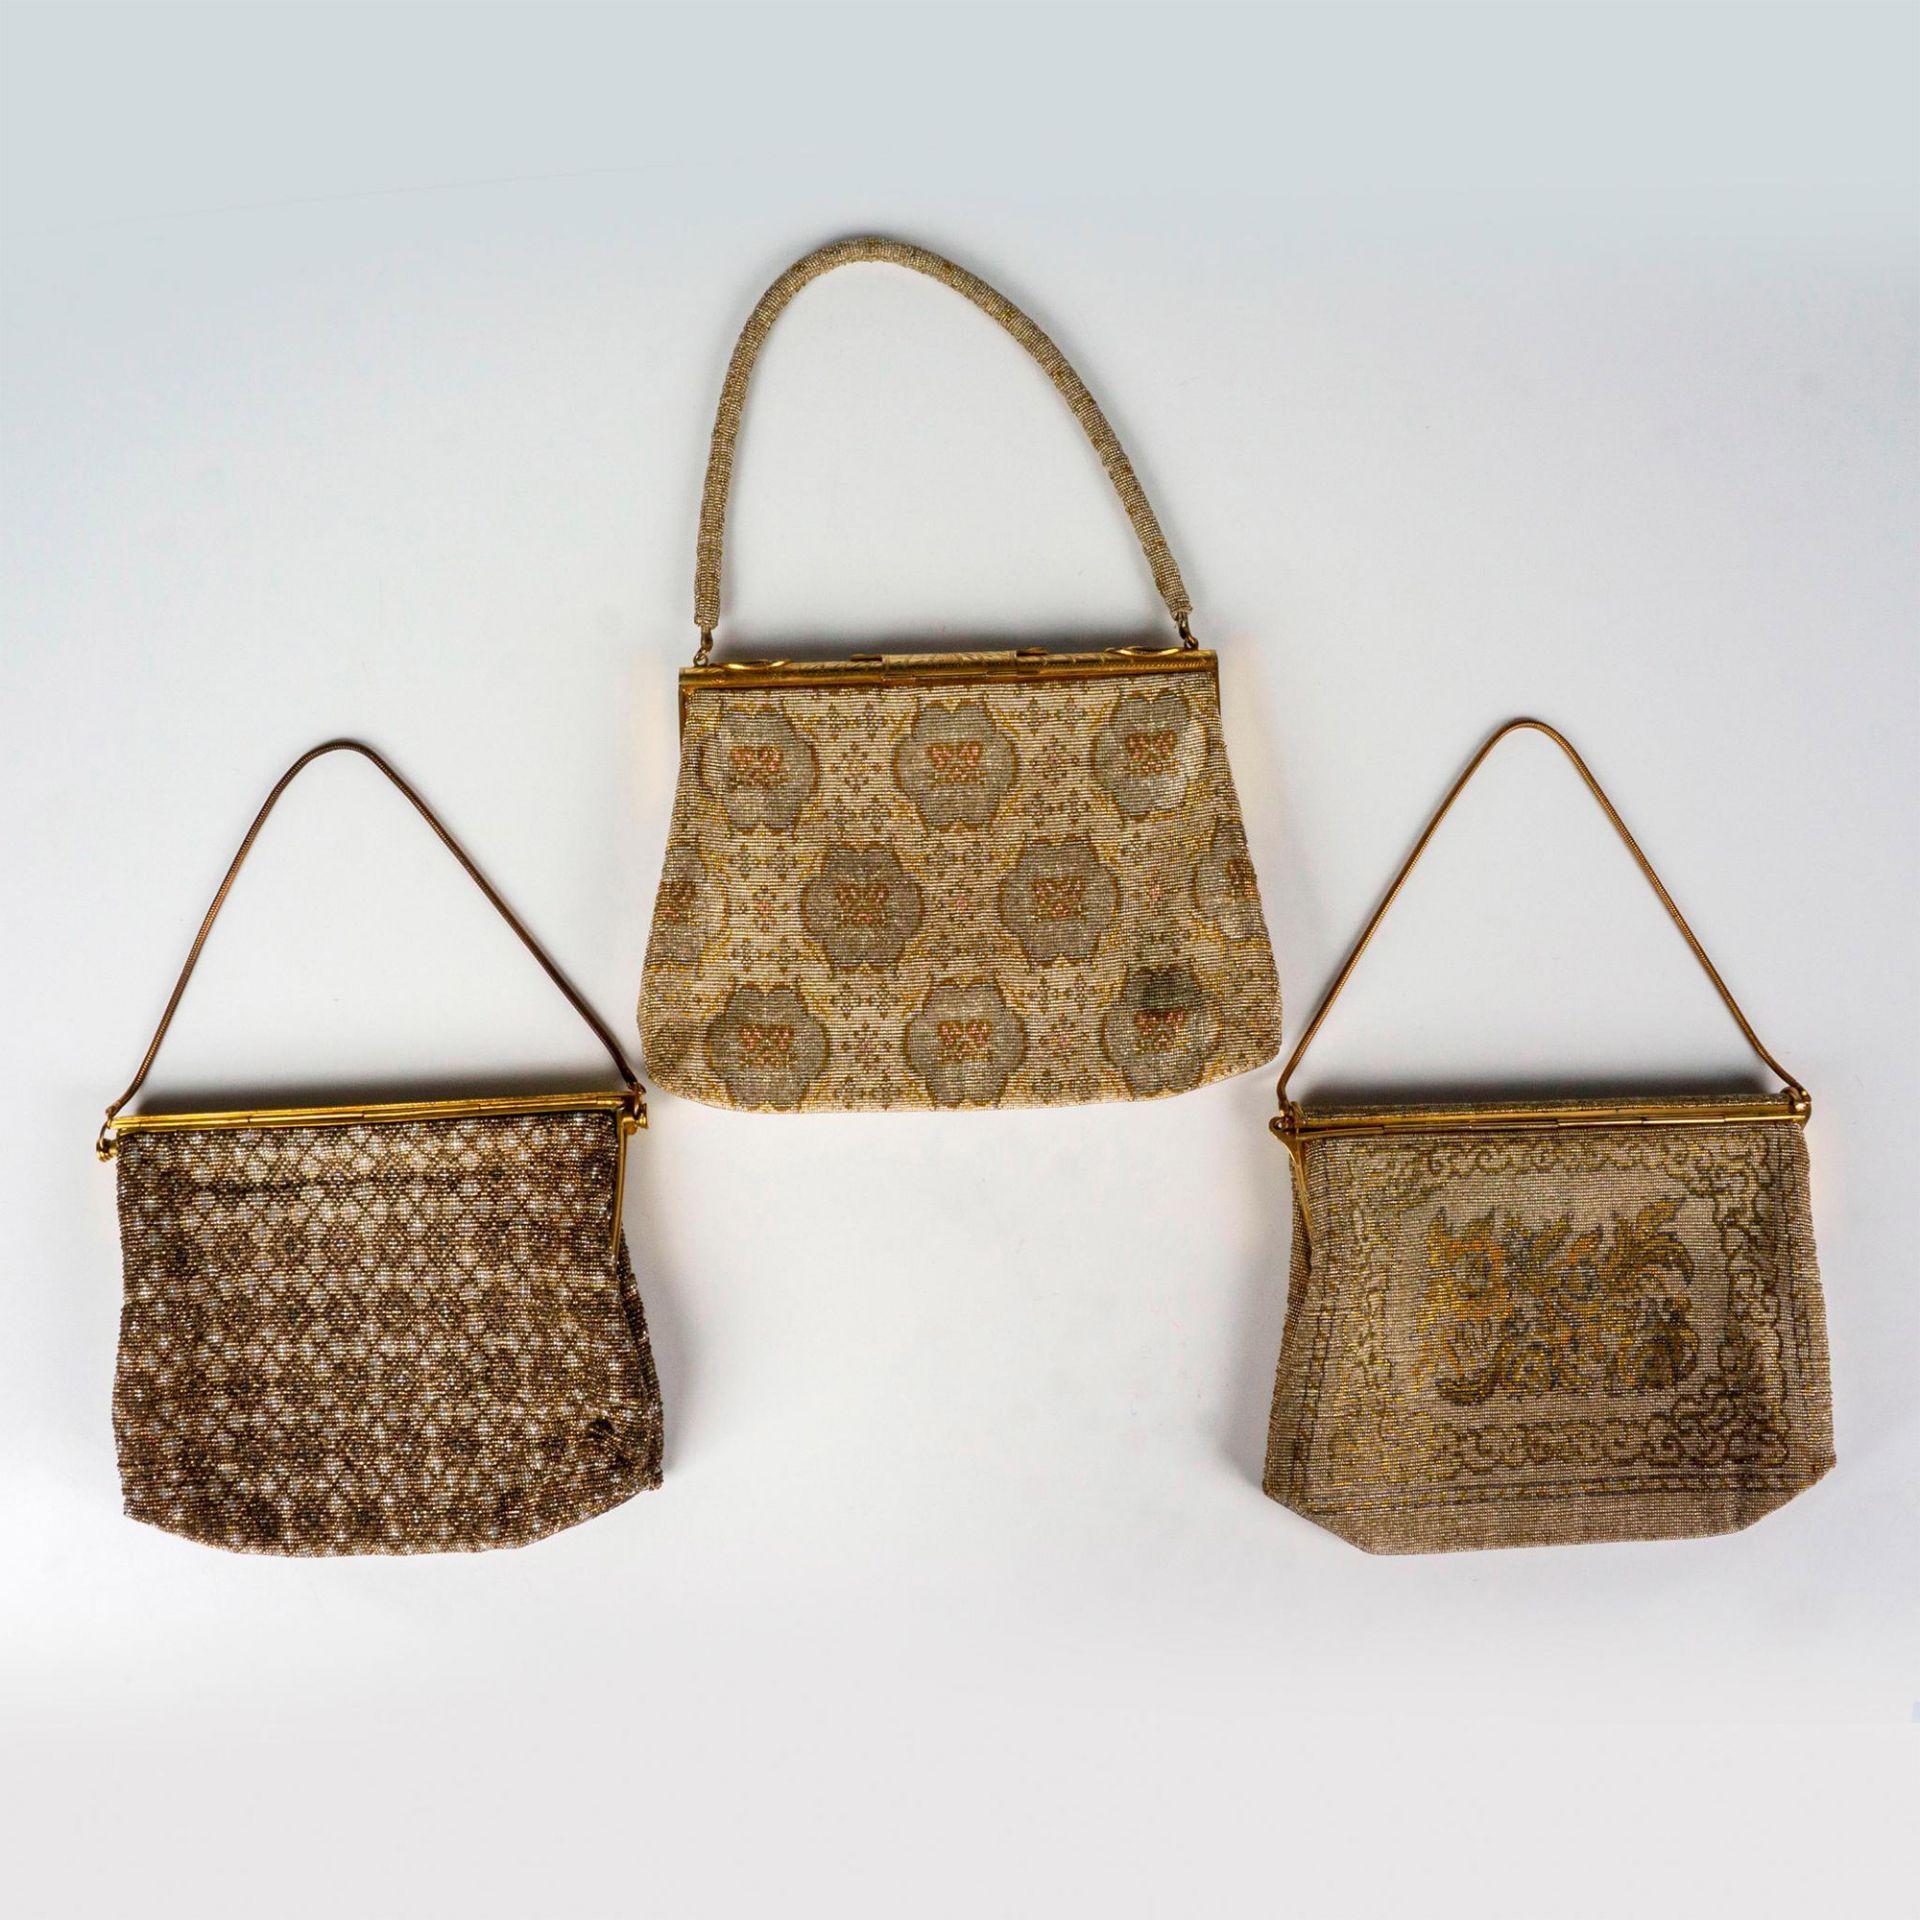 3pc Vintage French Beaded Evening Purses - Image 2 of 3